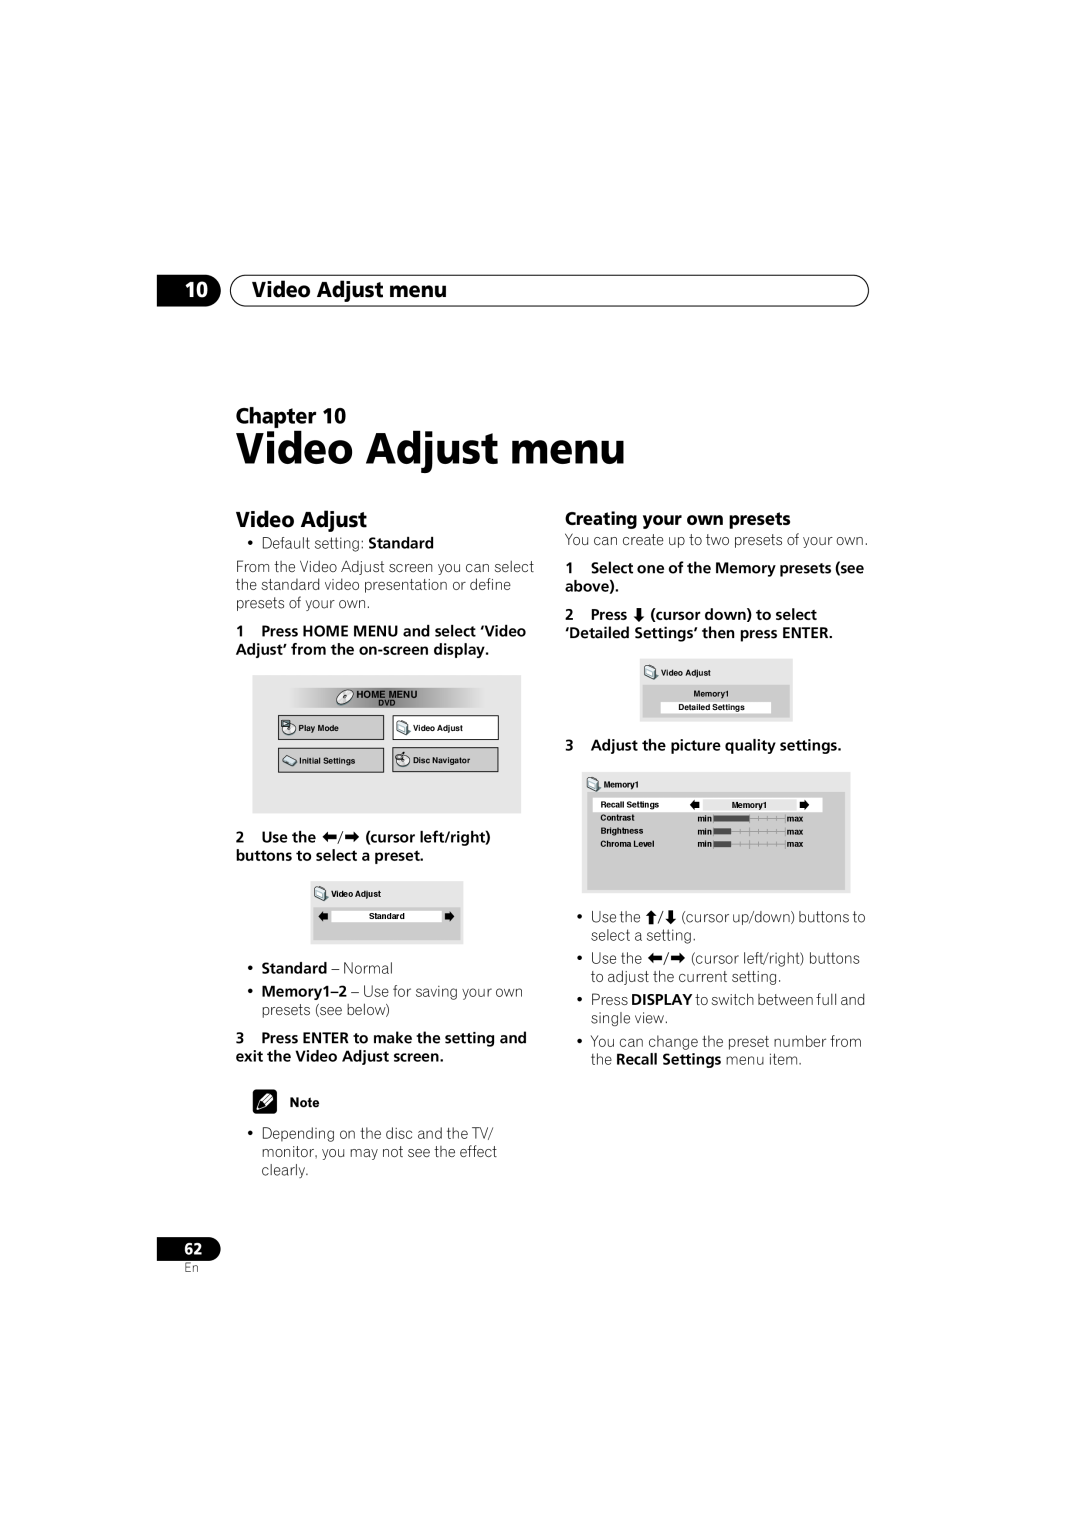 Pioneer S-DV990ST, S-DV99ST manual 10Video Adjust menu Chapter, Creating your own presets 